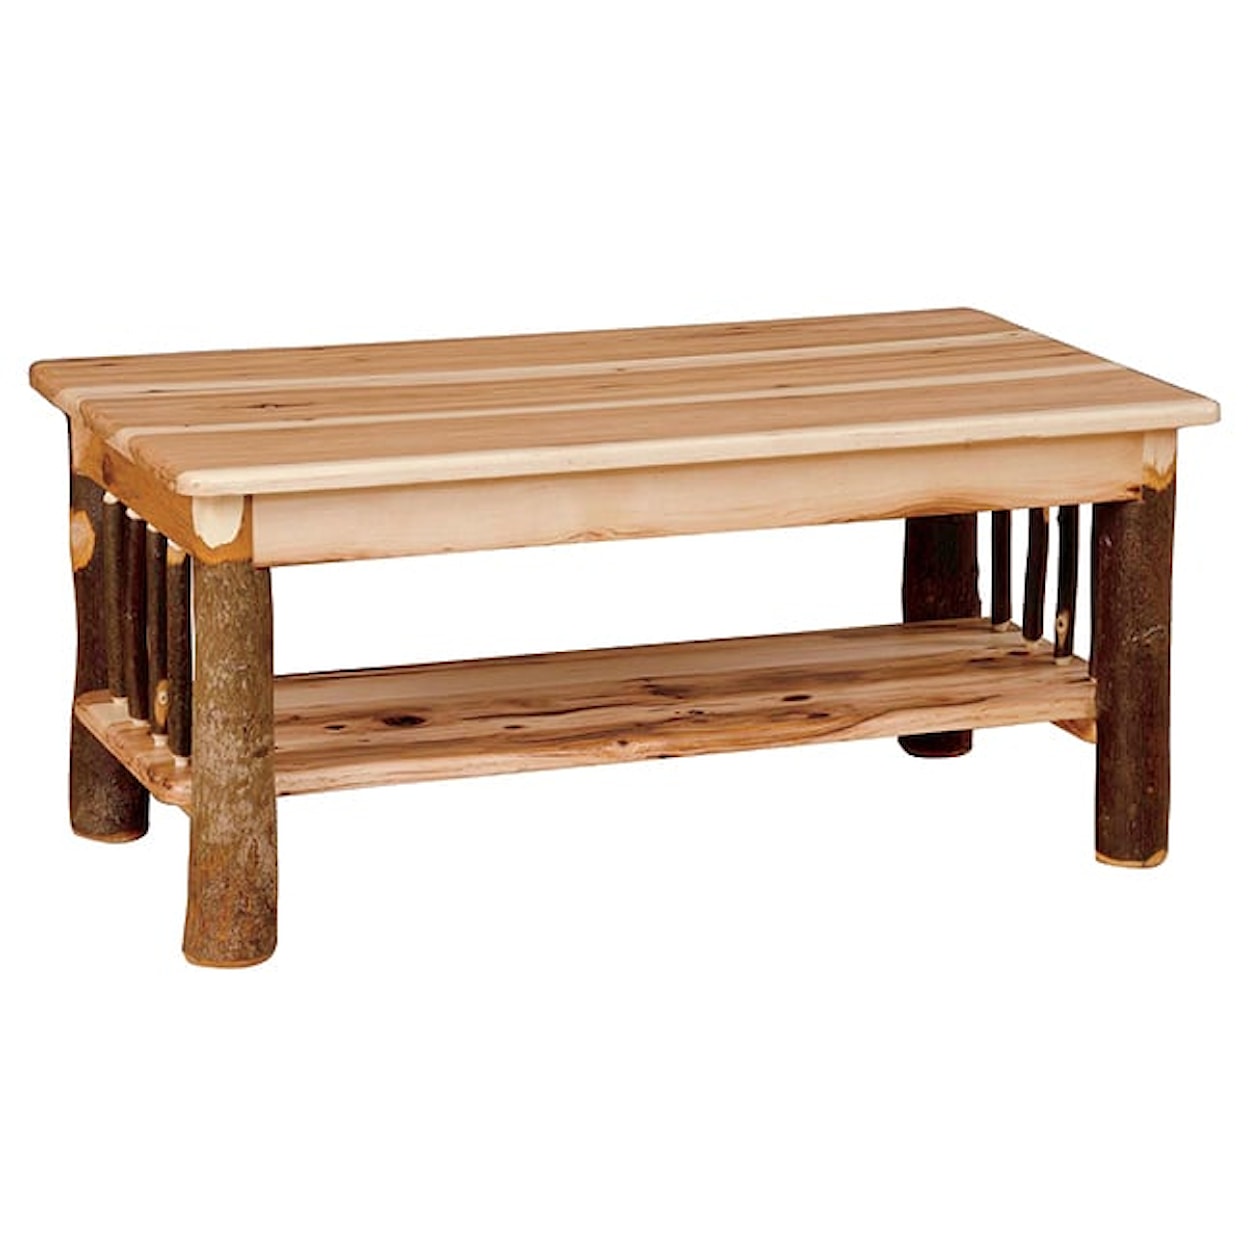 Byler's Rustic Furniture Hickory Collection Spindle Coffee Table